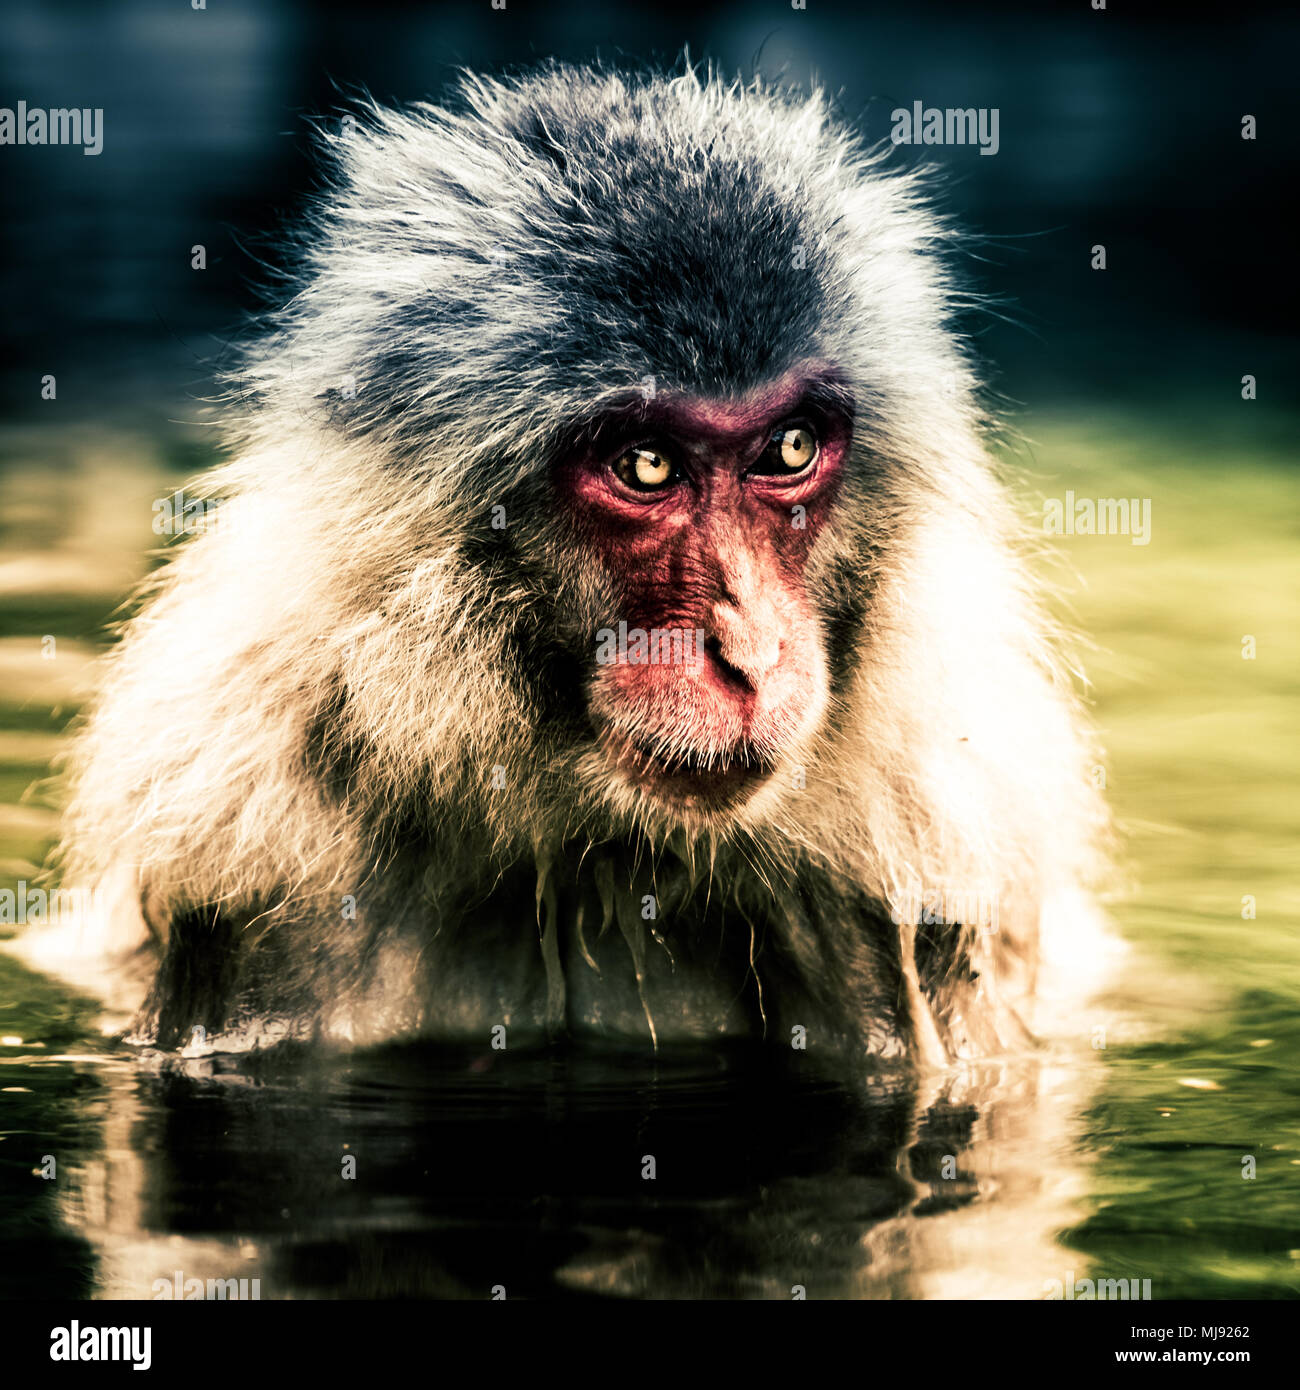 Japanese Macaque snow monkey taking a bath Stock Photo